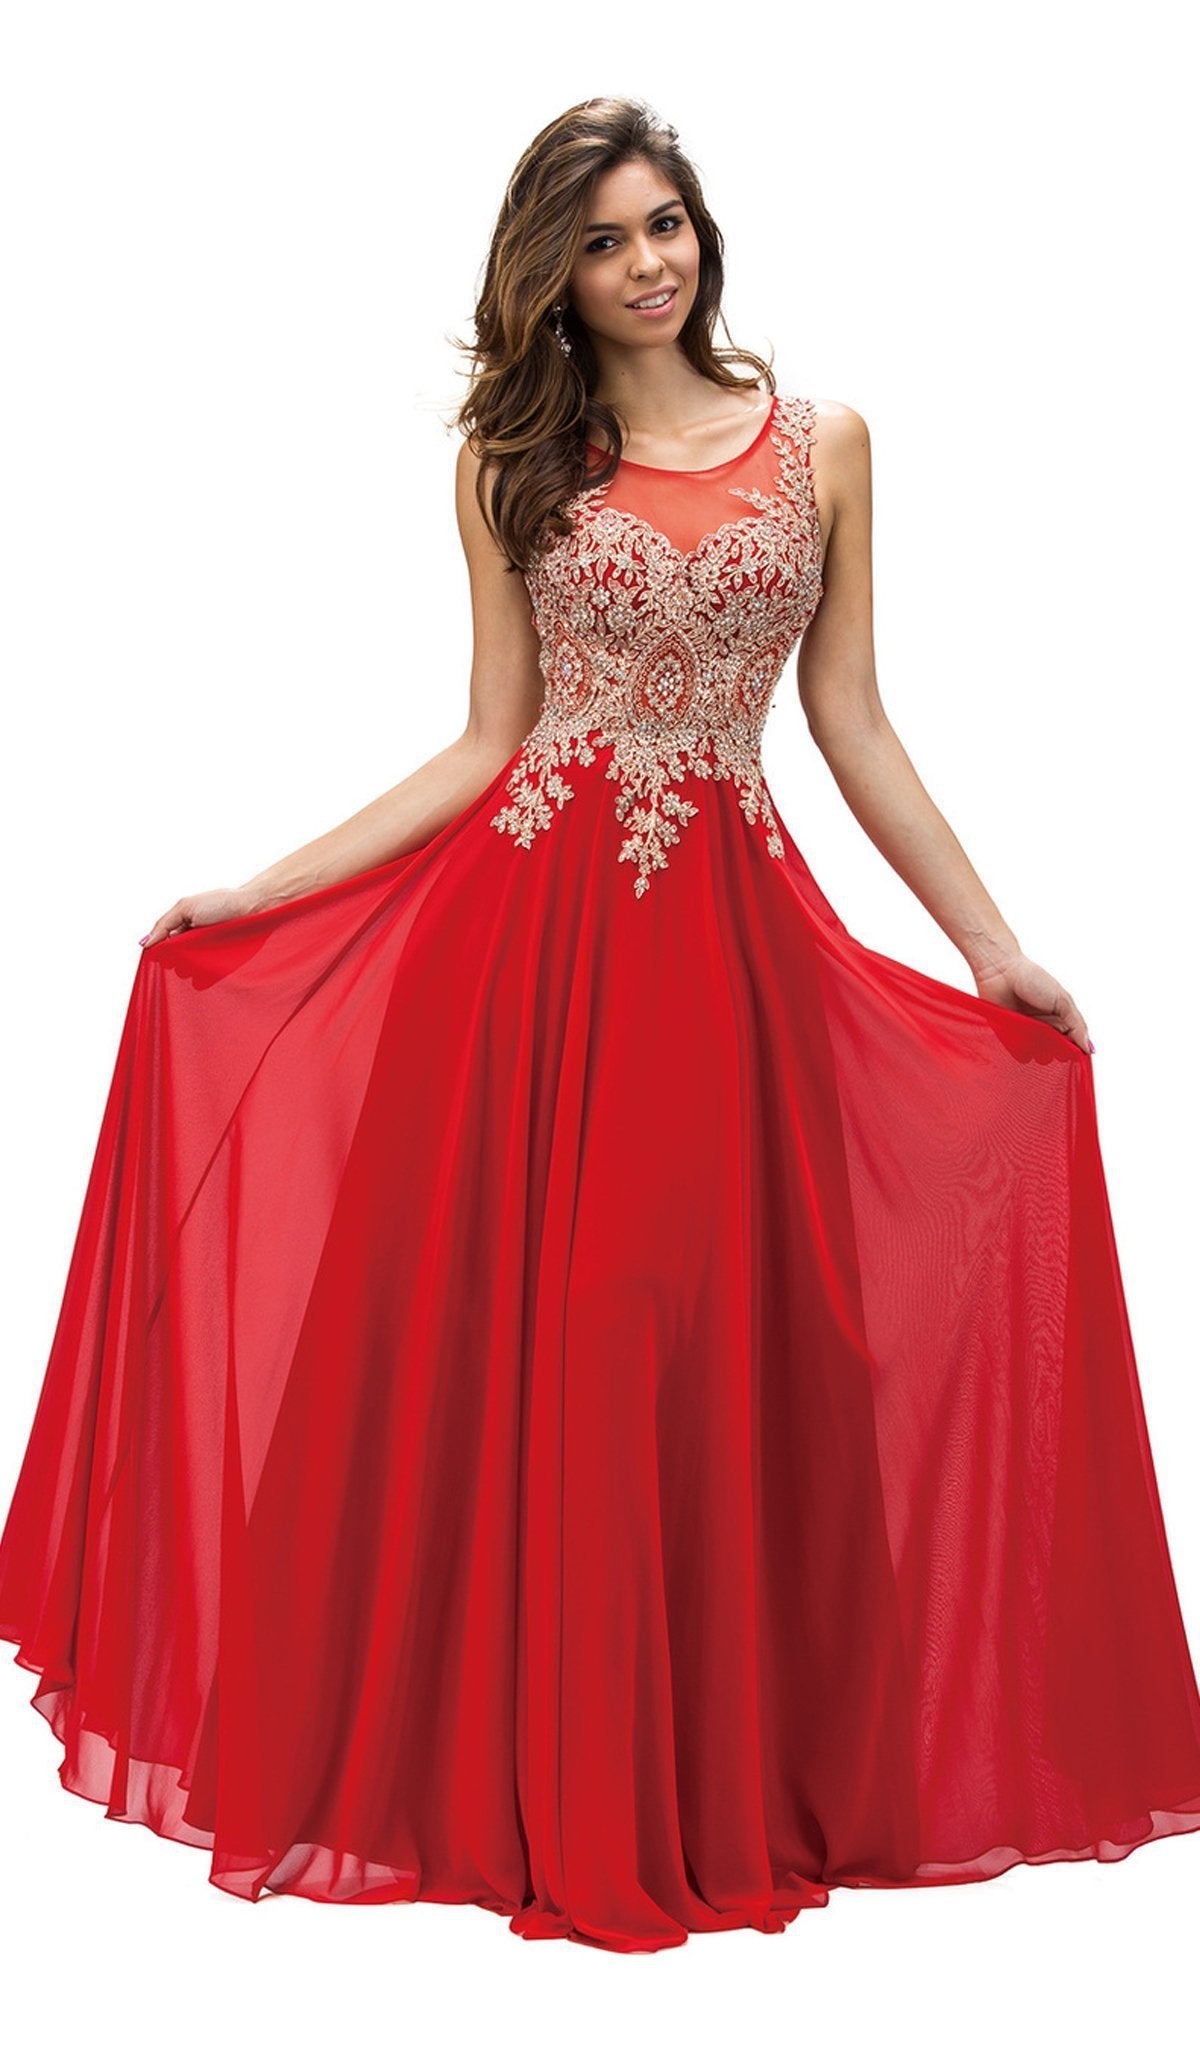 Dancing Queen - 9191 Lace Appliqued Chiffon Prom Dress Special Occasion Dress XS / Red